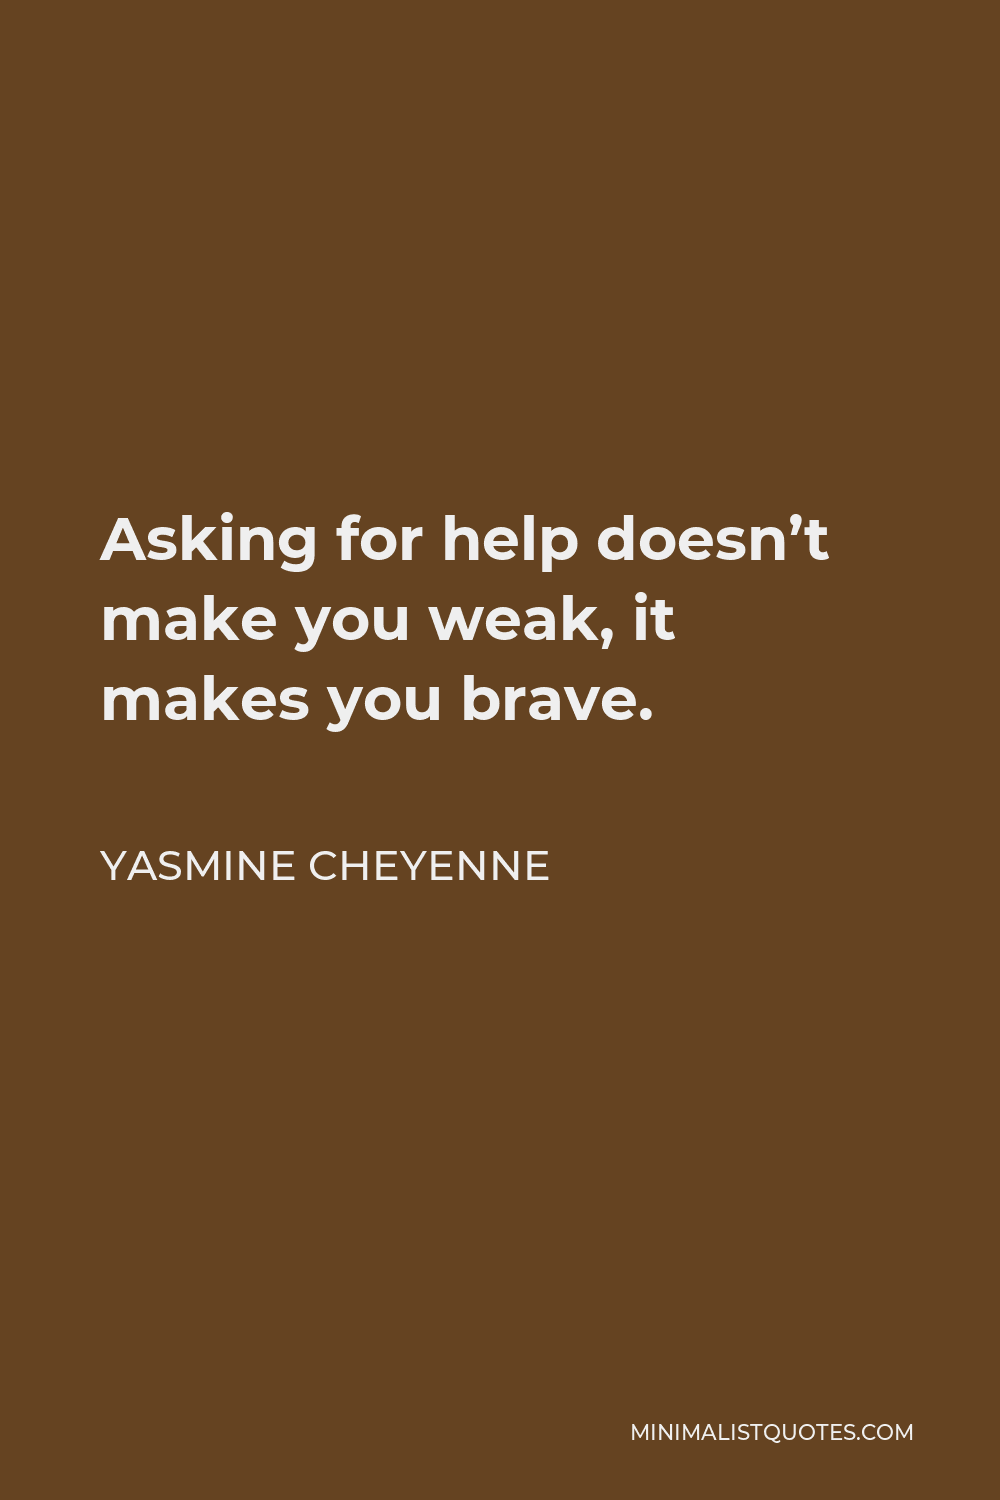 Yasmine Cheyenne Quote - Asking for help doesn’t make you weak, it makes you brave.